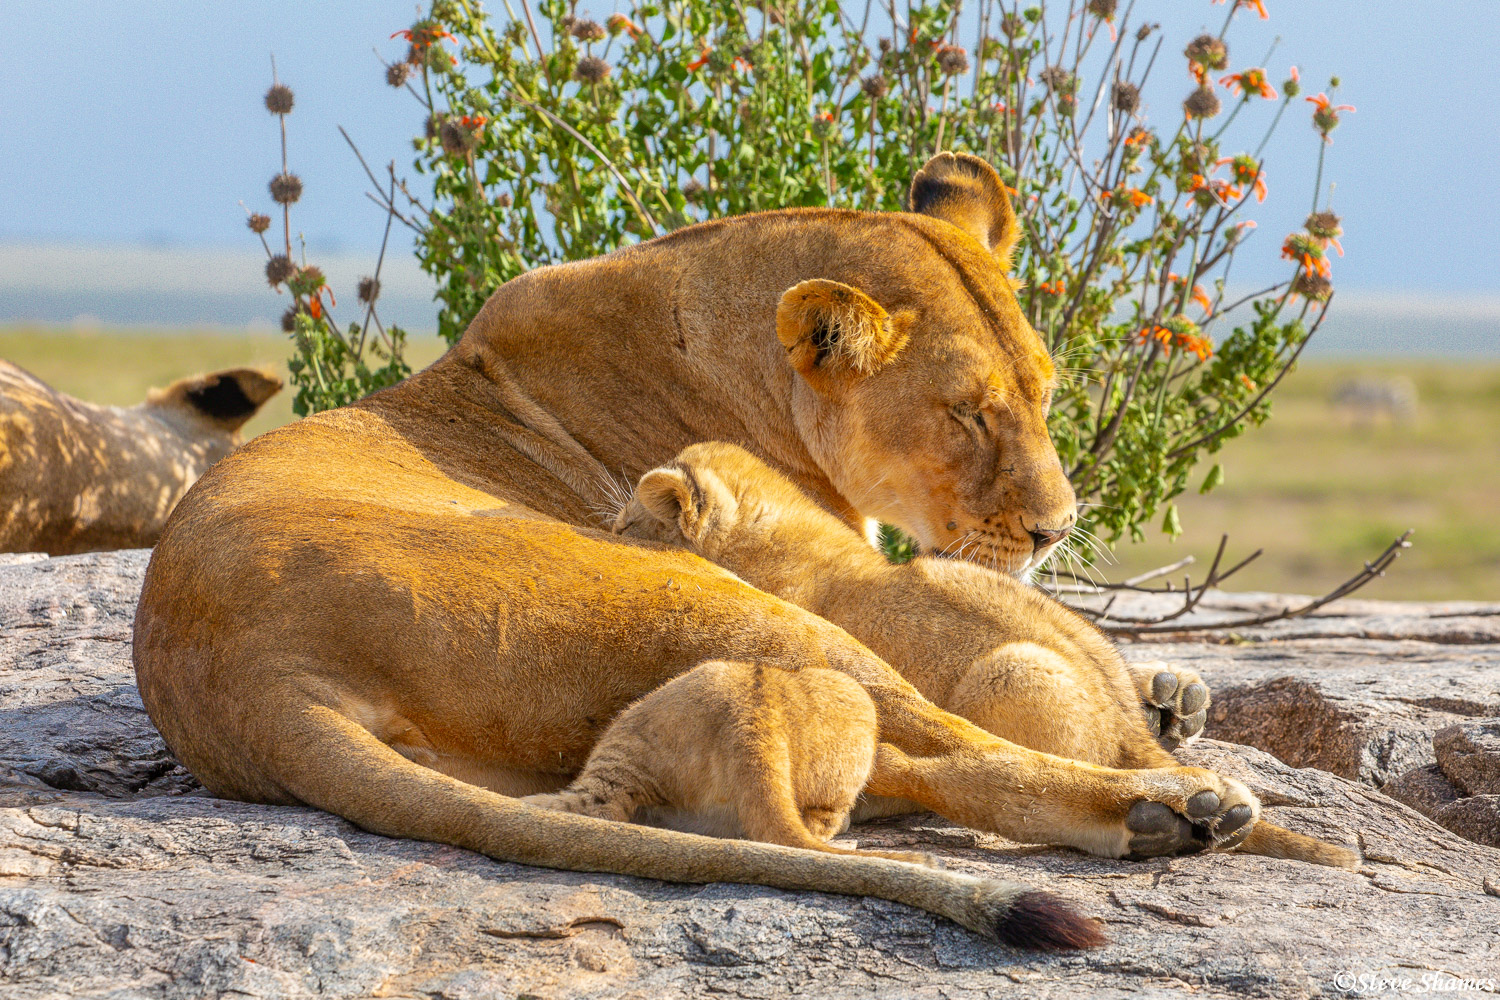 Lion cubs nursing from mama lioness. Lions make such good mothers.